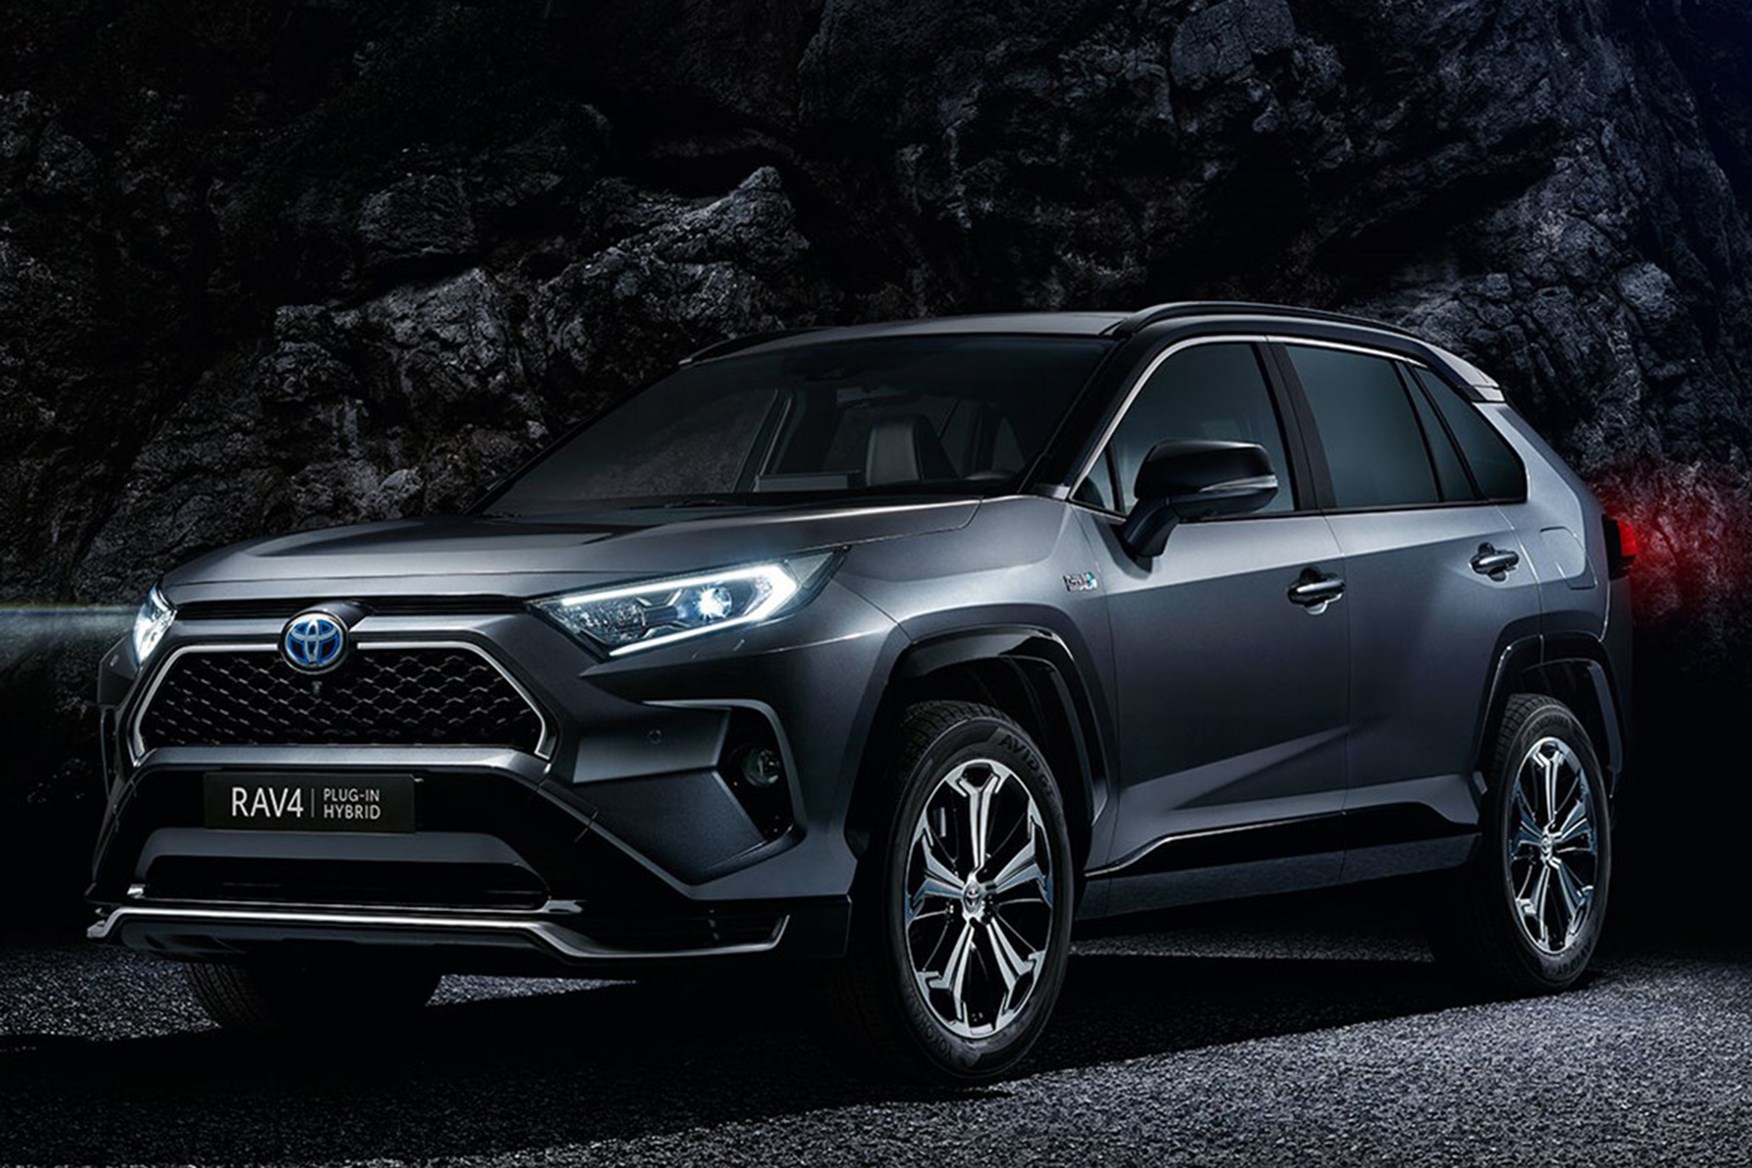 2020-toyota-rav4-plug-in-hybrid-even-more-tax-efficient-parkers